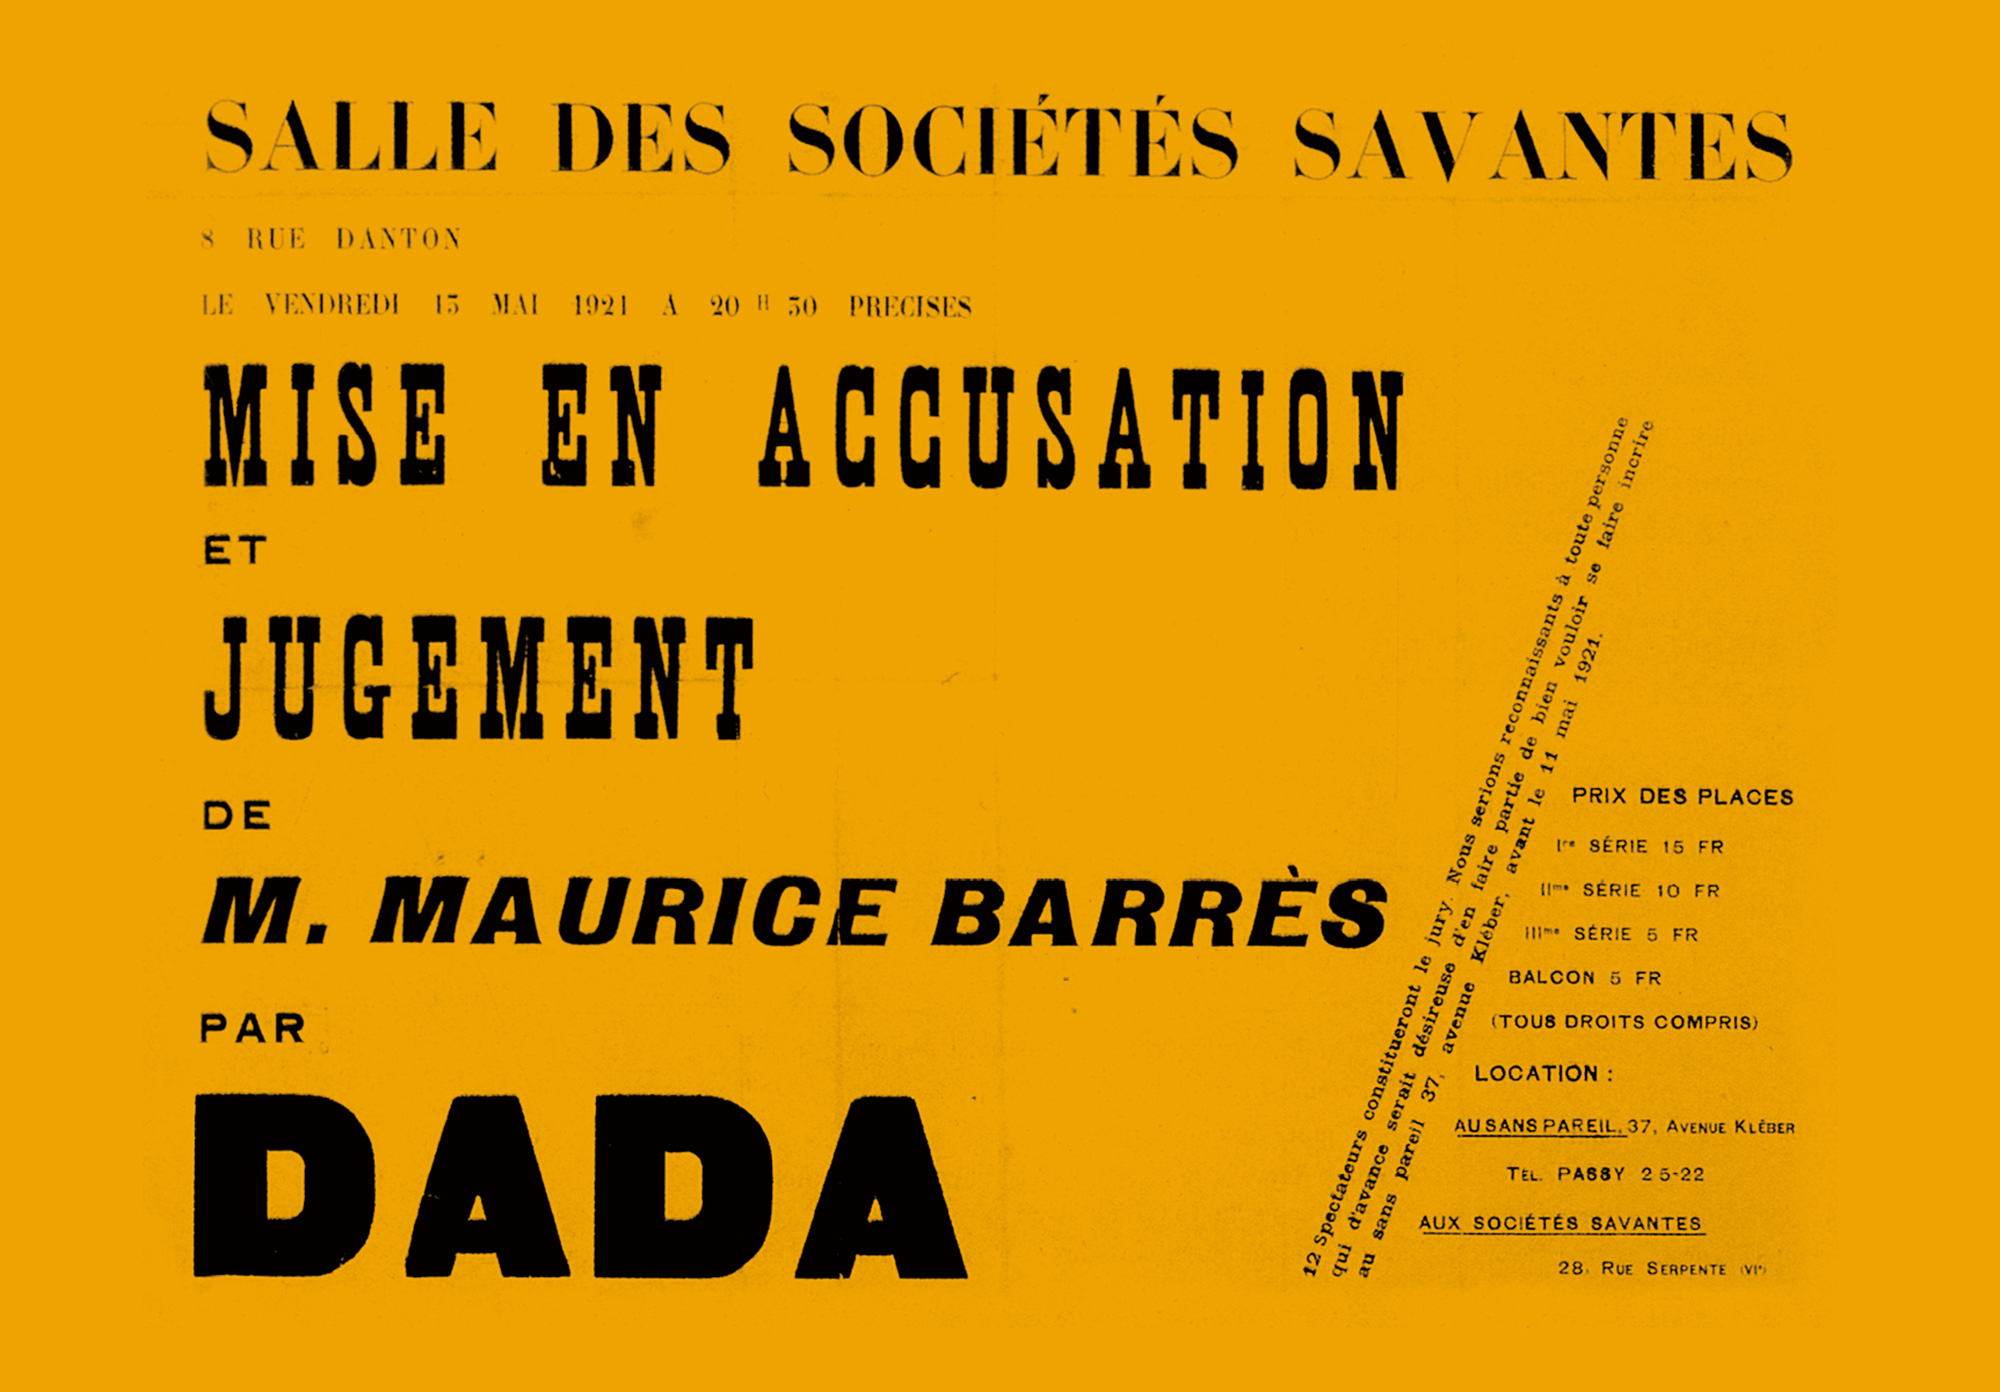 The official poster announcing the trial of Maurice Barrès.